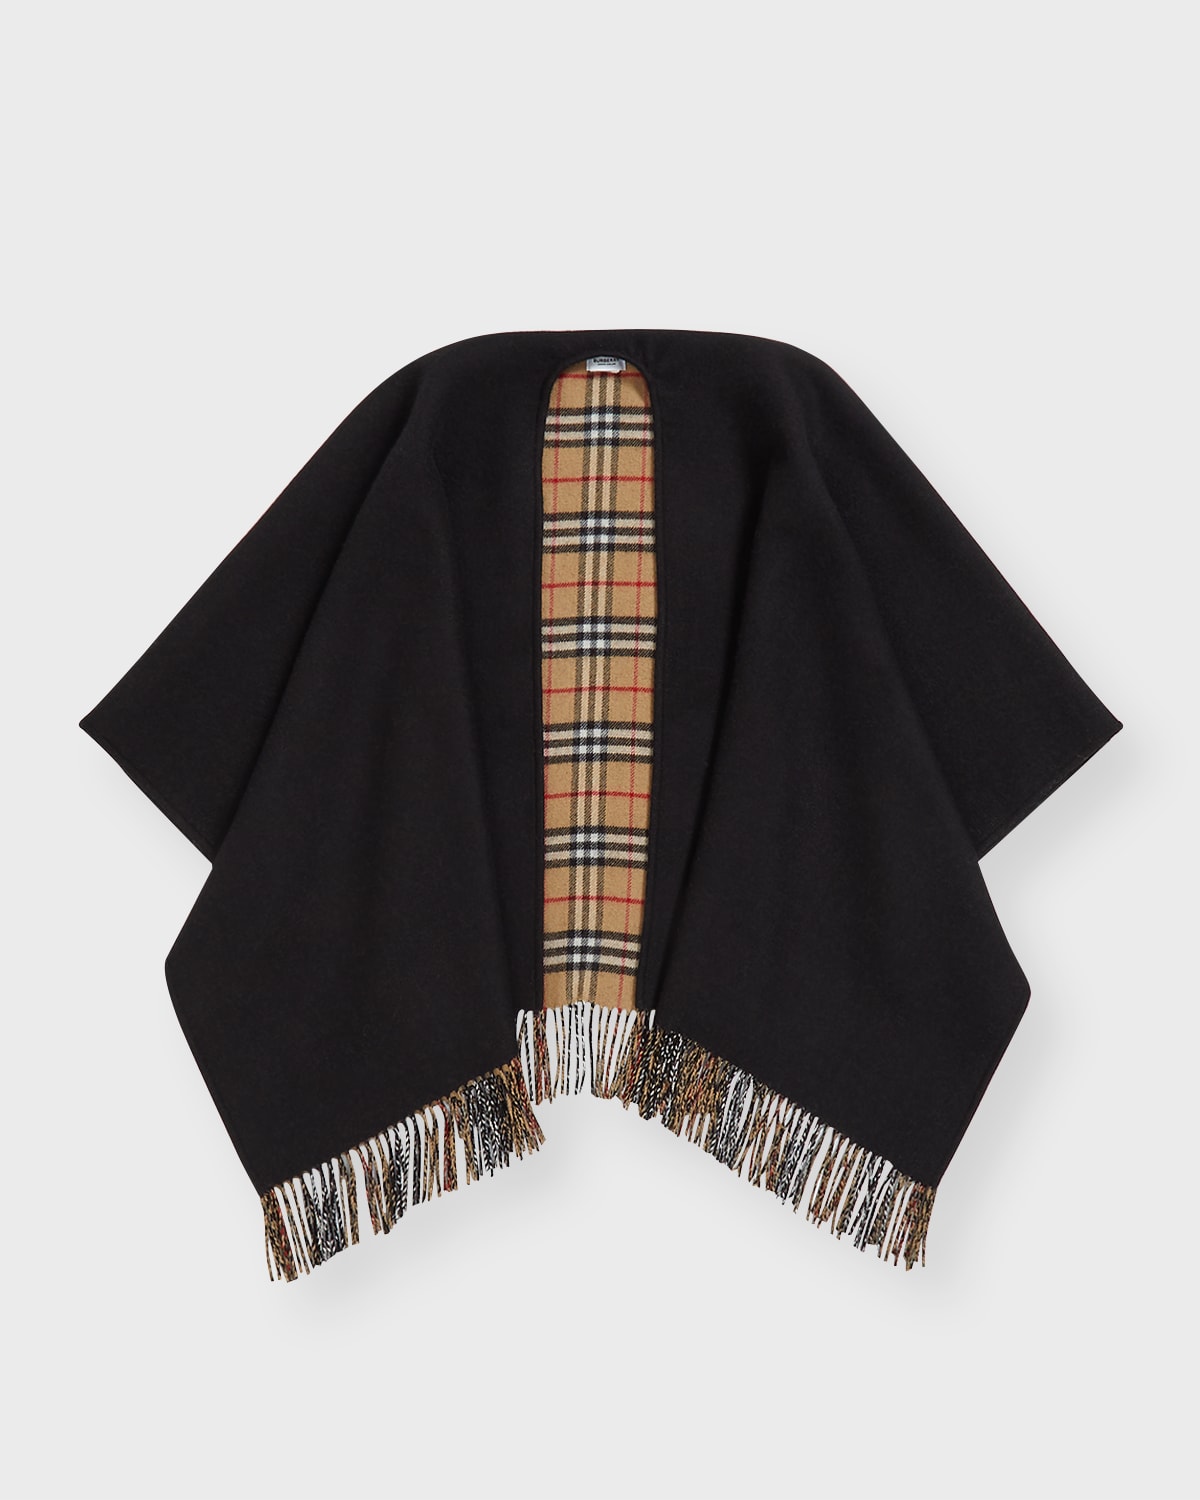 Burberry Carrie Check Cashmere & Wool Cape | Neiman Marcus